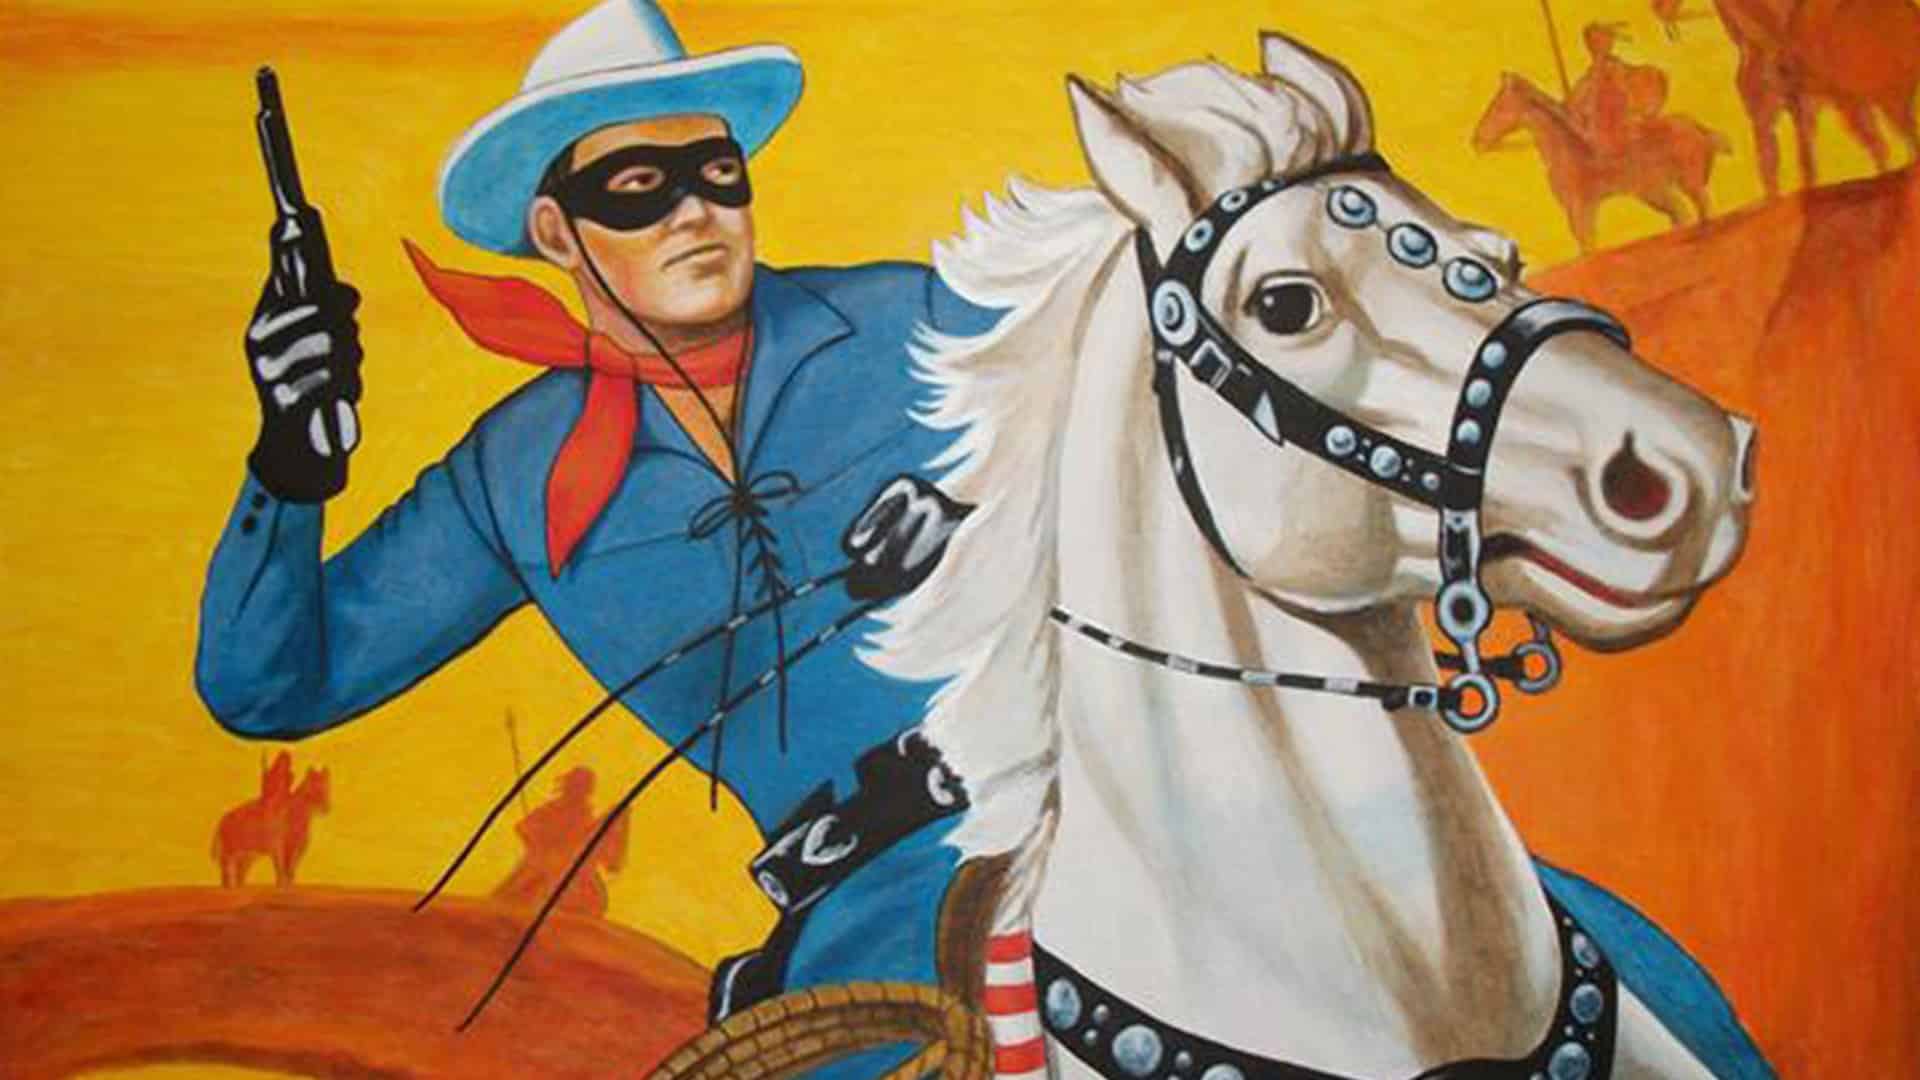 The Lone Ranger Episodes 1 and 2